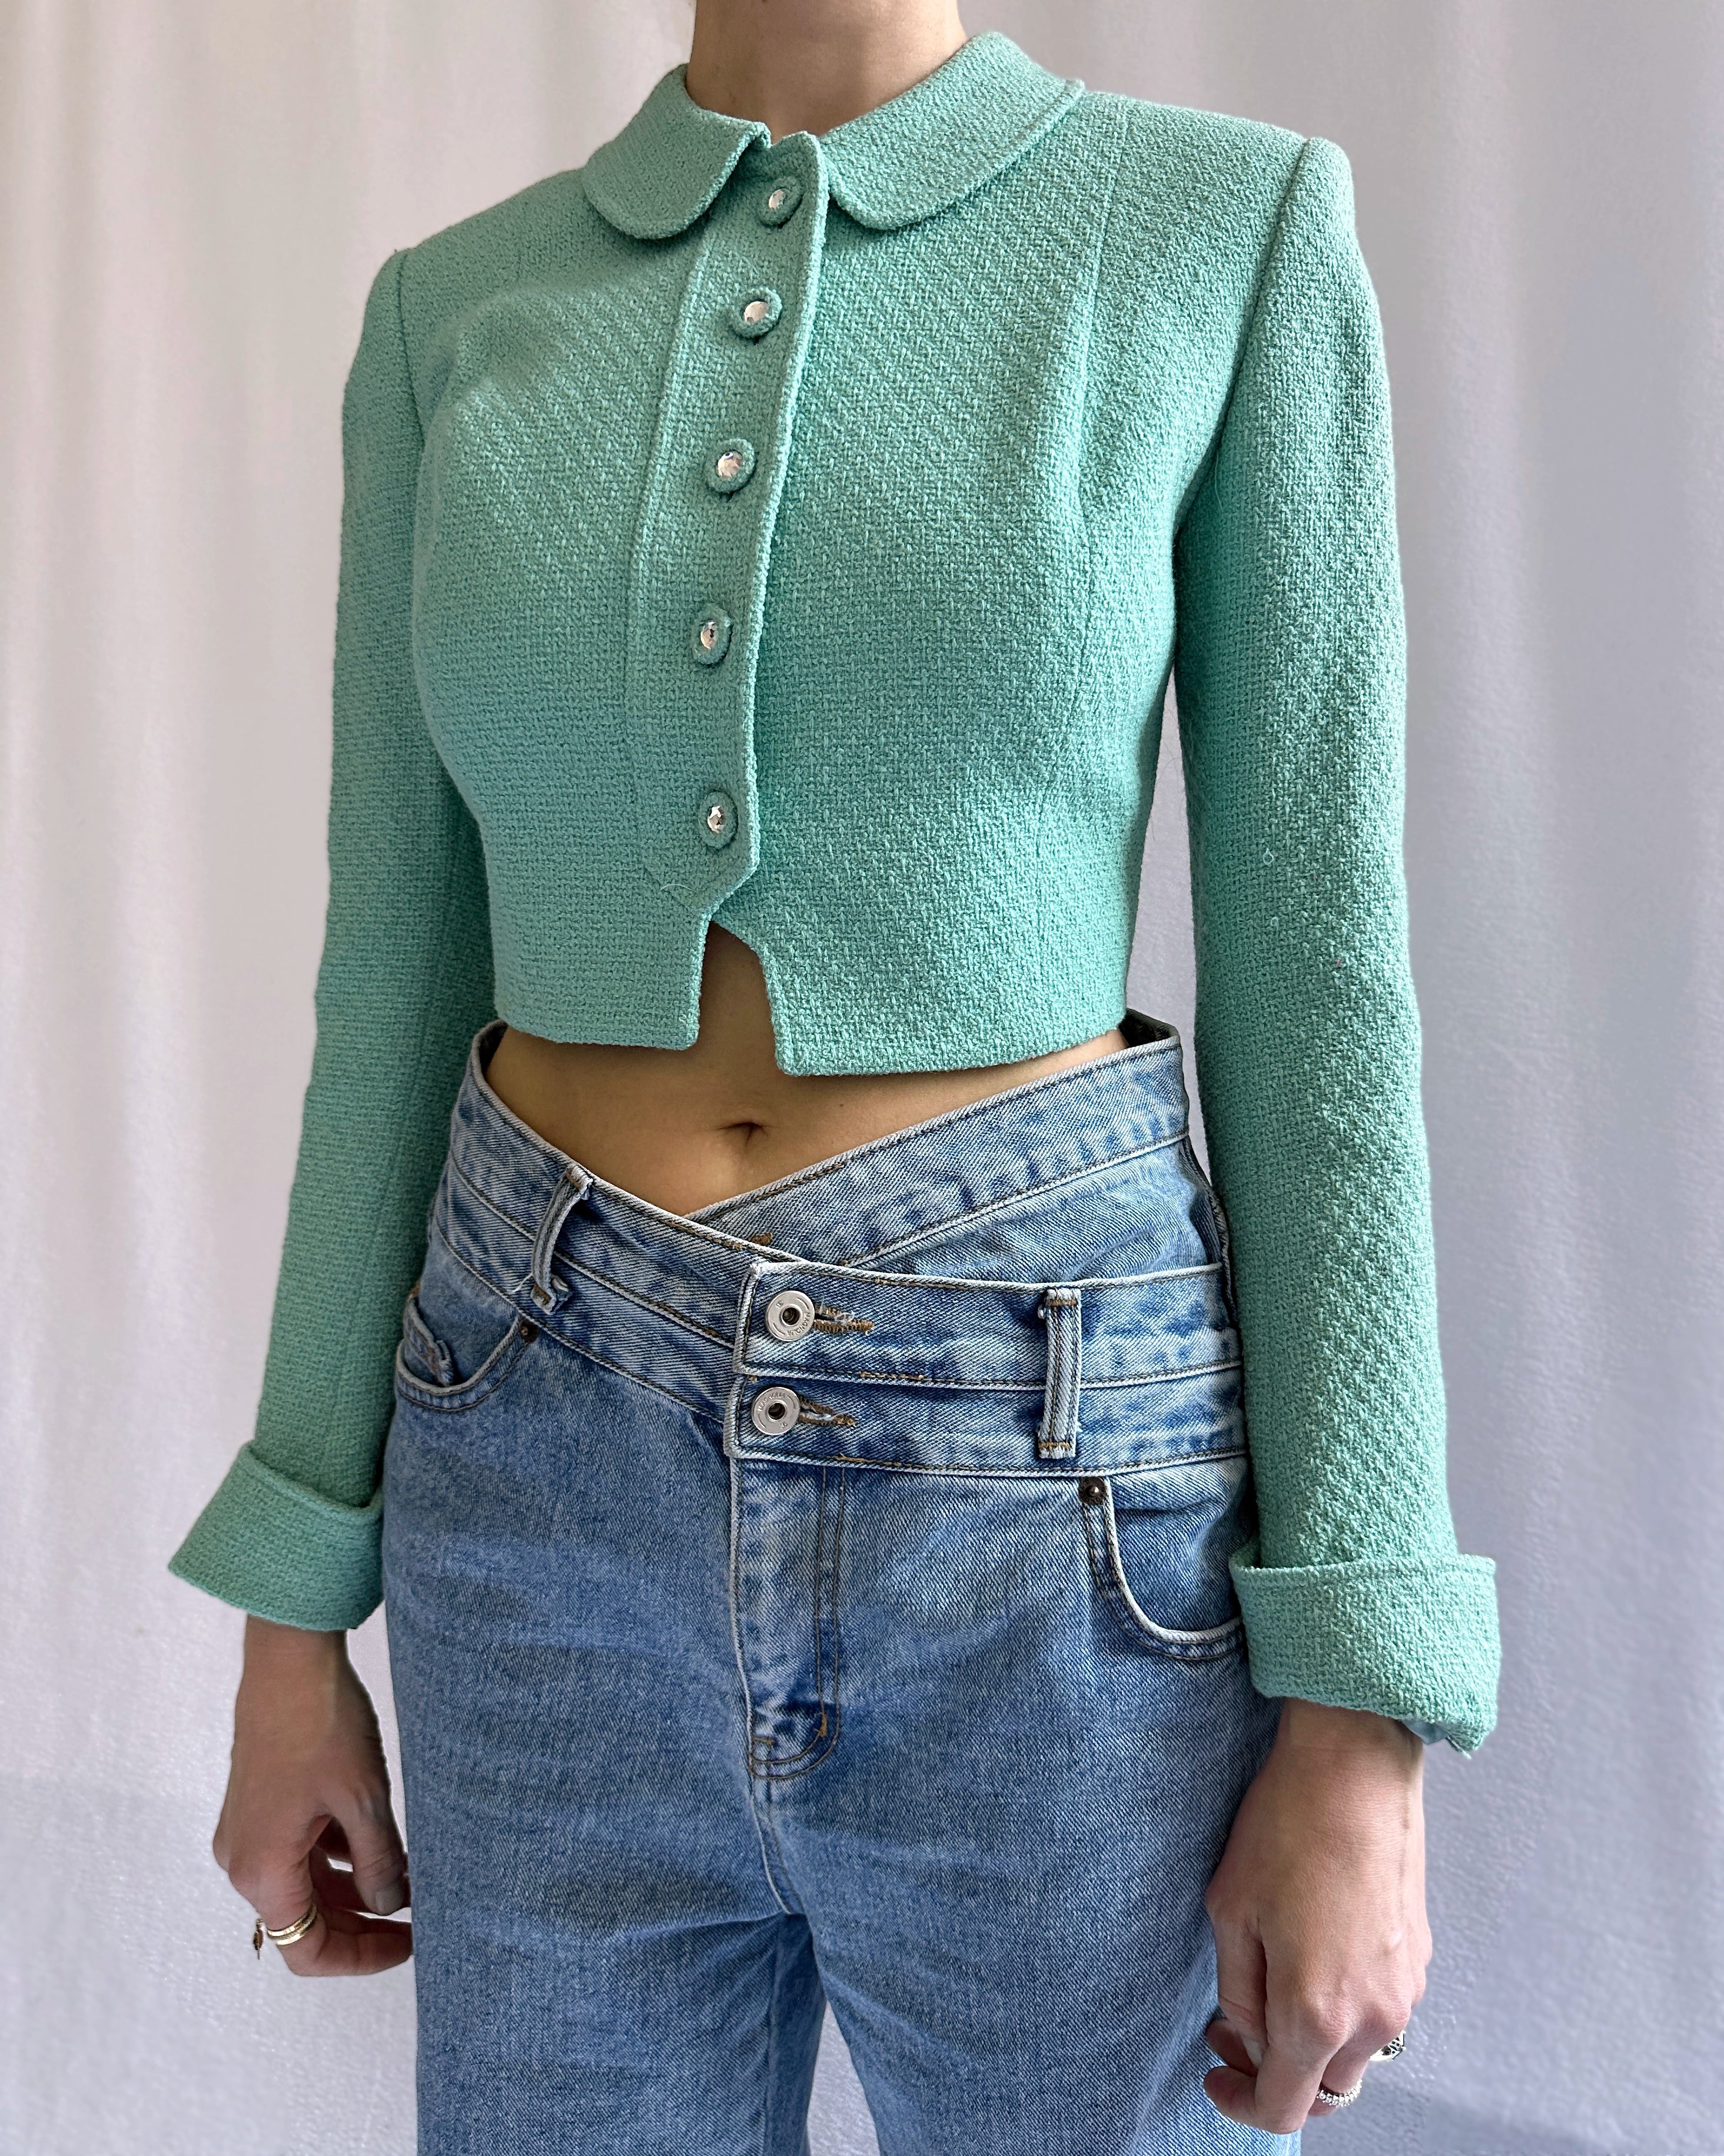 CHANEL, Tops, Authentic Vintage Chanel 998 Cc Logo Green Knit Top Shirt  Sweater